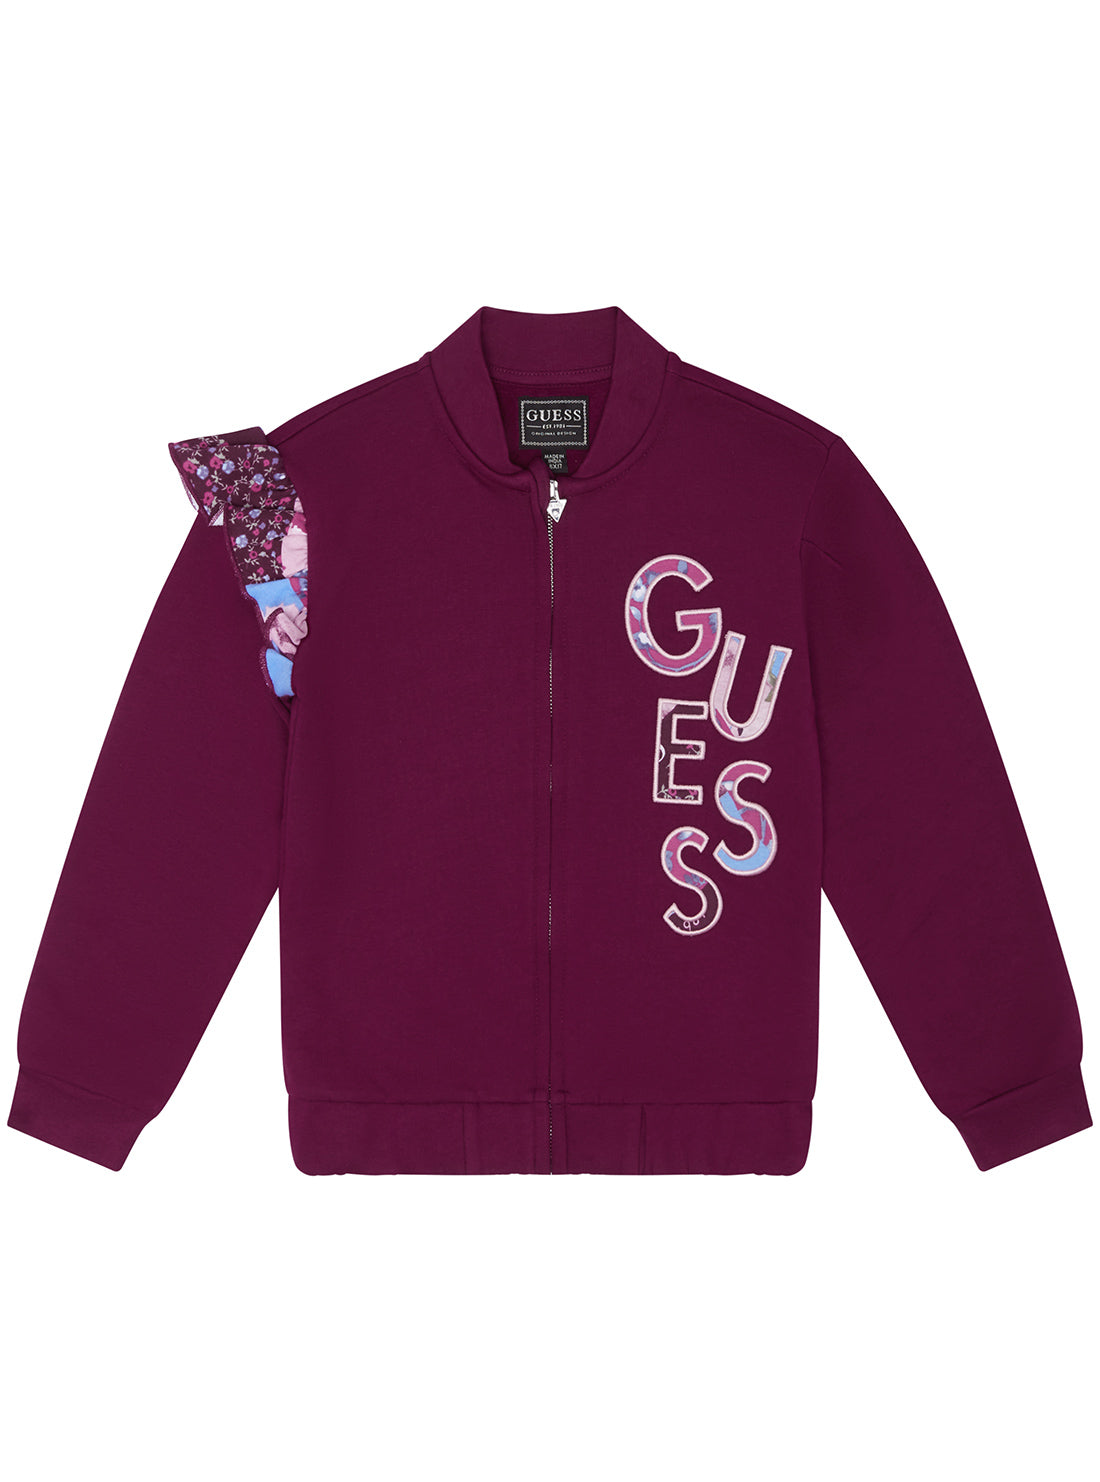 GUESS Purple Long Sleeve Jacket (2-7) front view